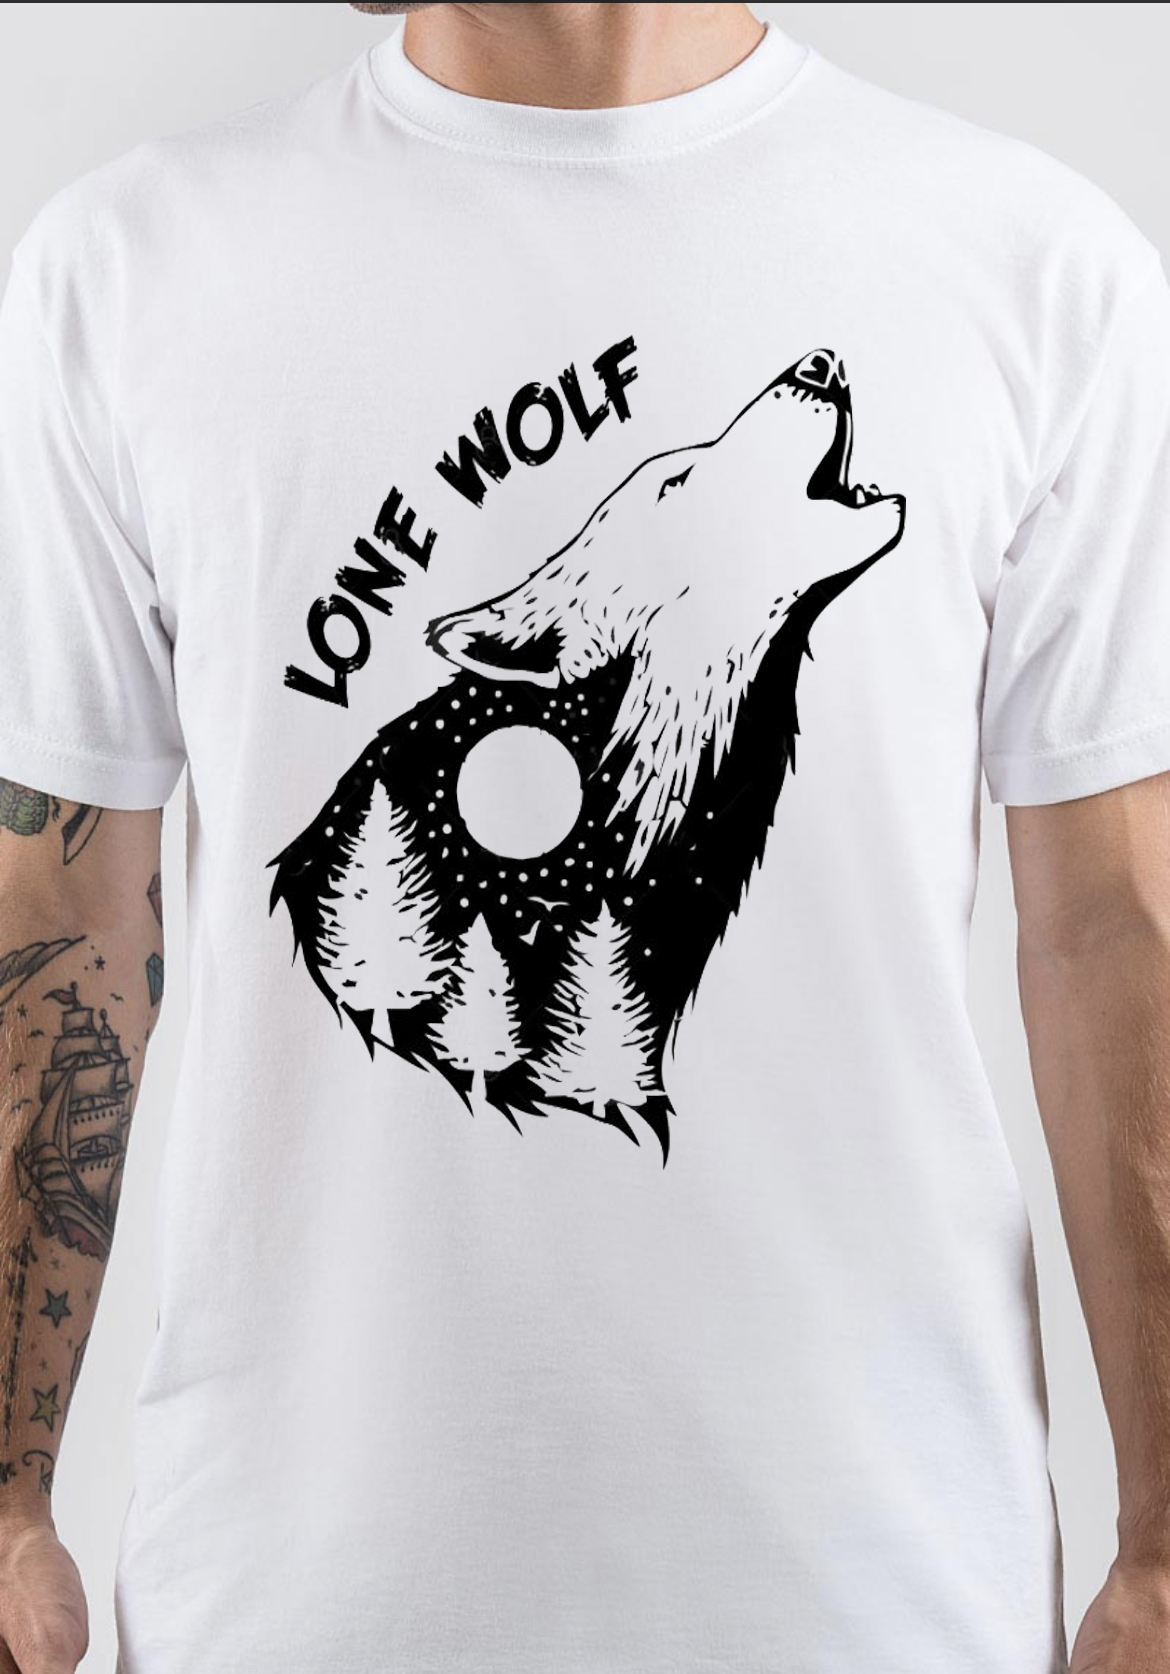 Lone Wolf T-Shirt And Merchandise